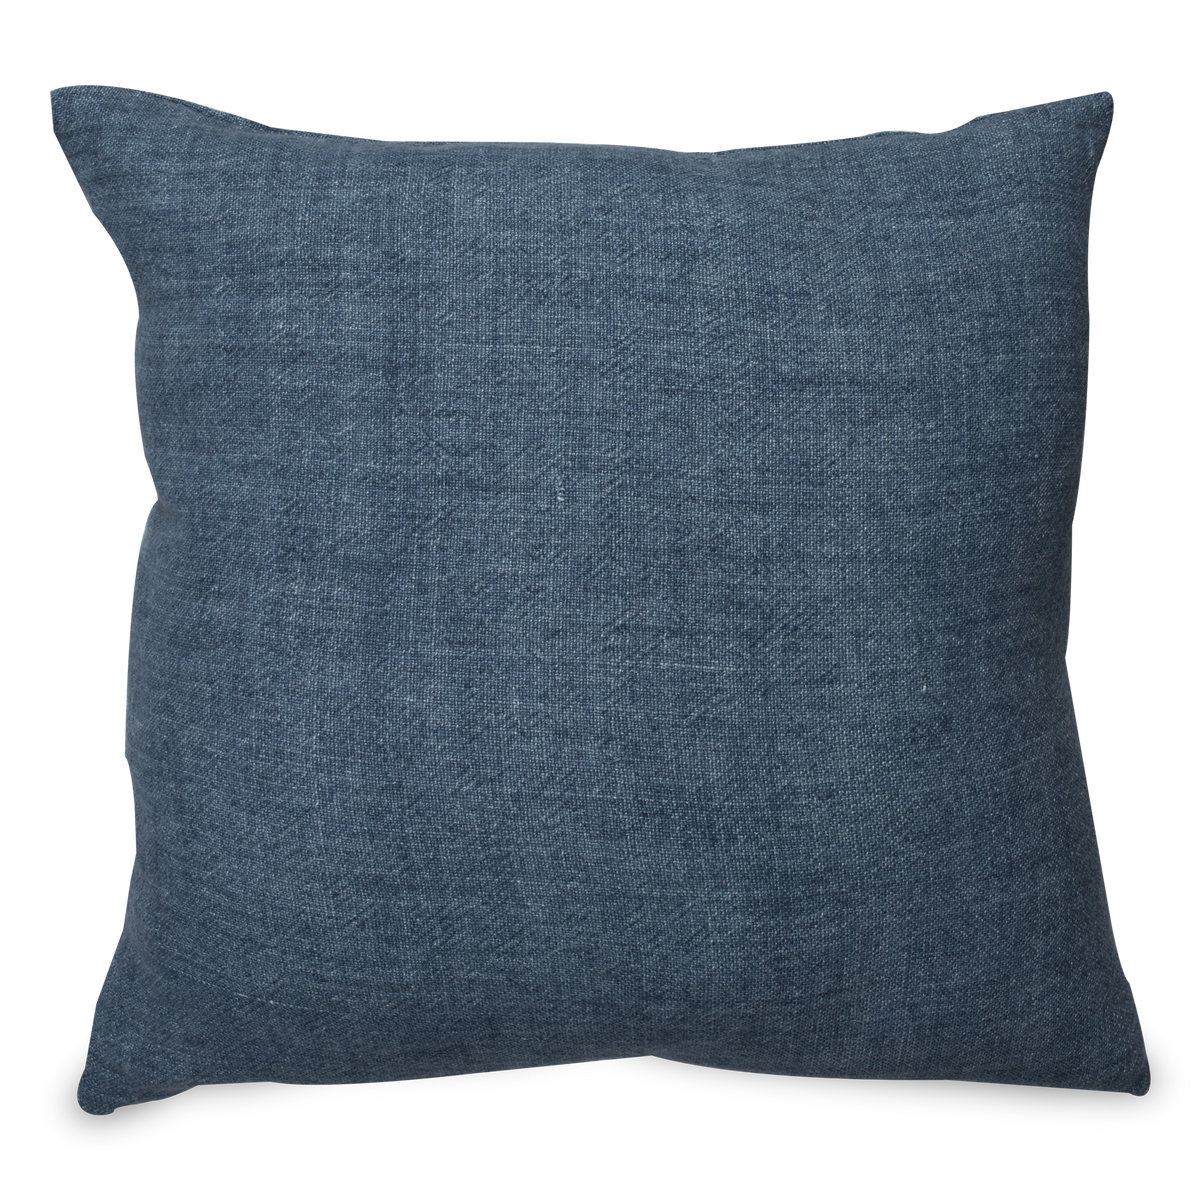 These pillows are made from pure 100% linen, rich in character and texture.